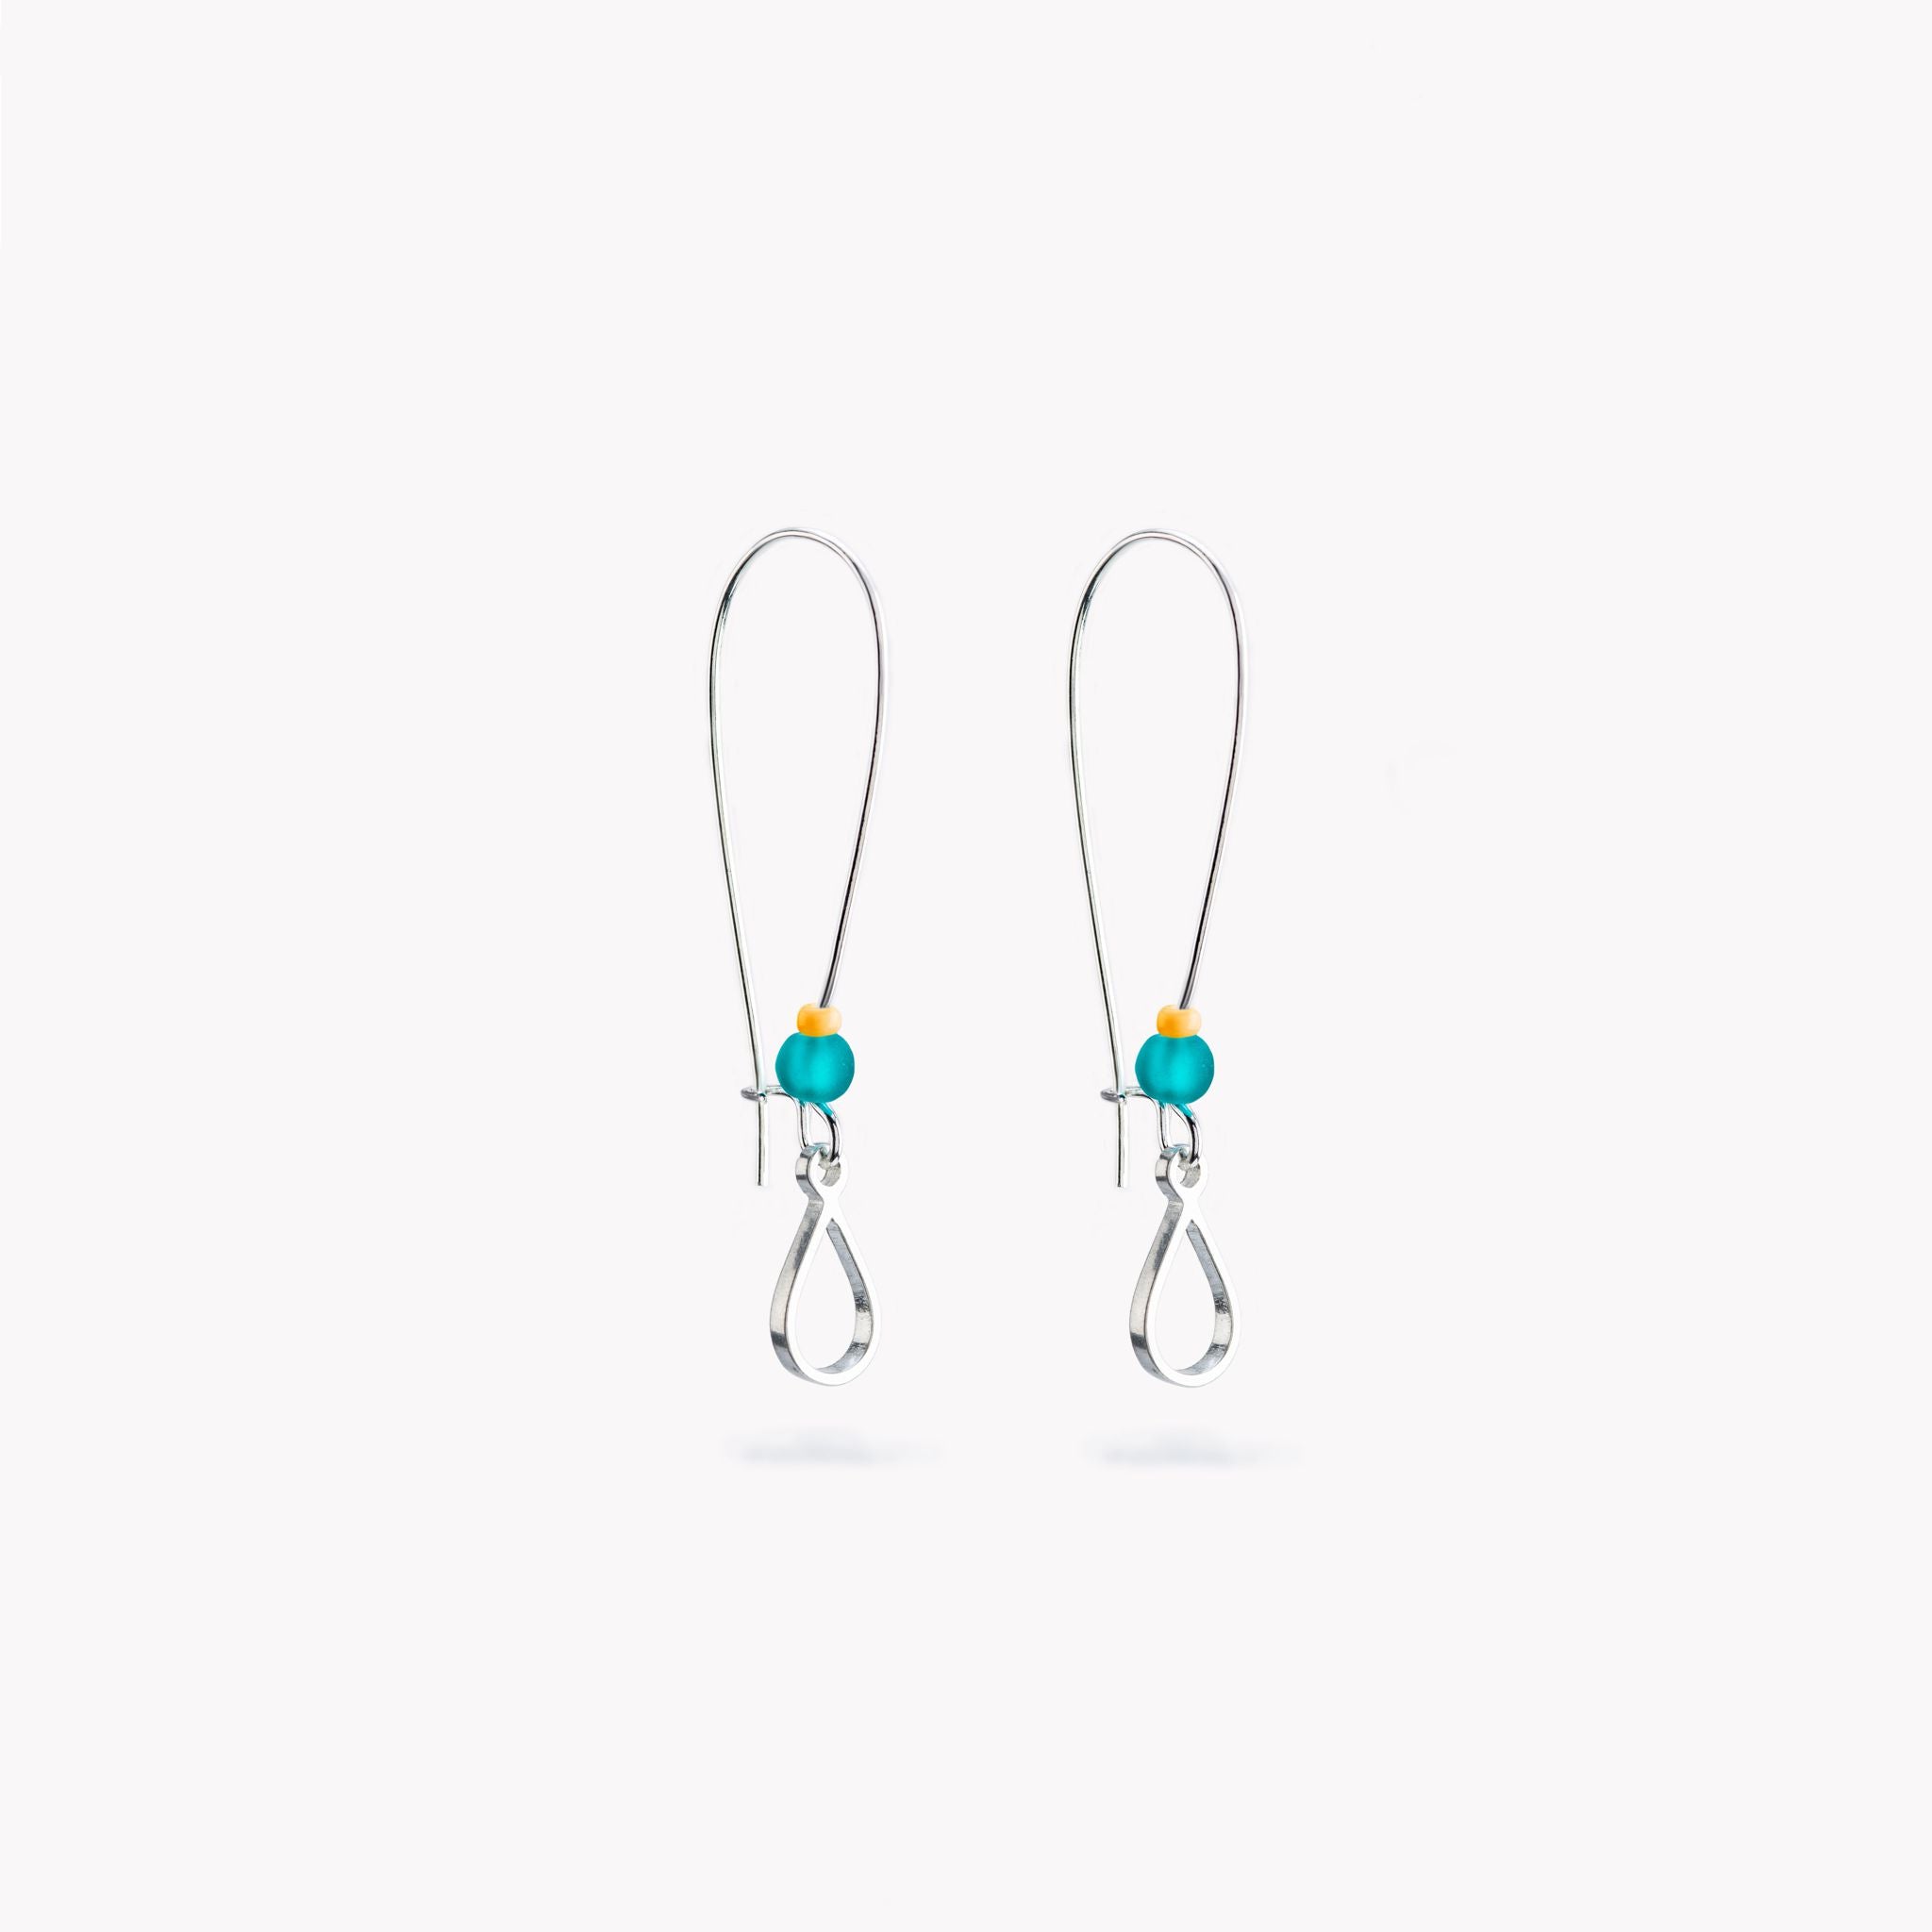 A pair of simple, teardrop shaped, pewter drop earrings with yellow glass beads.